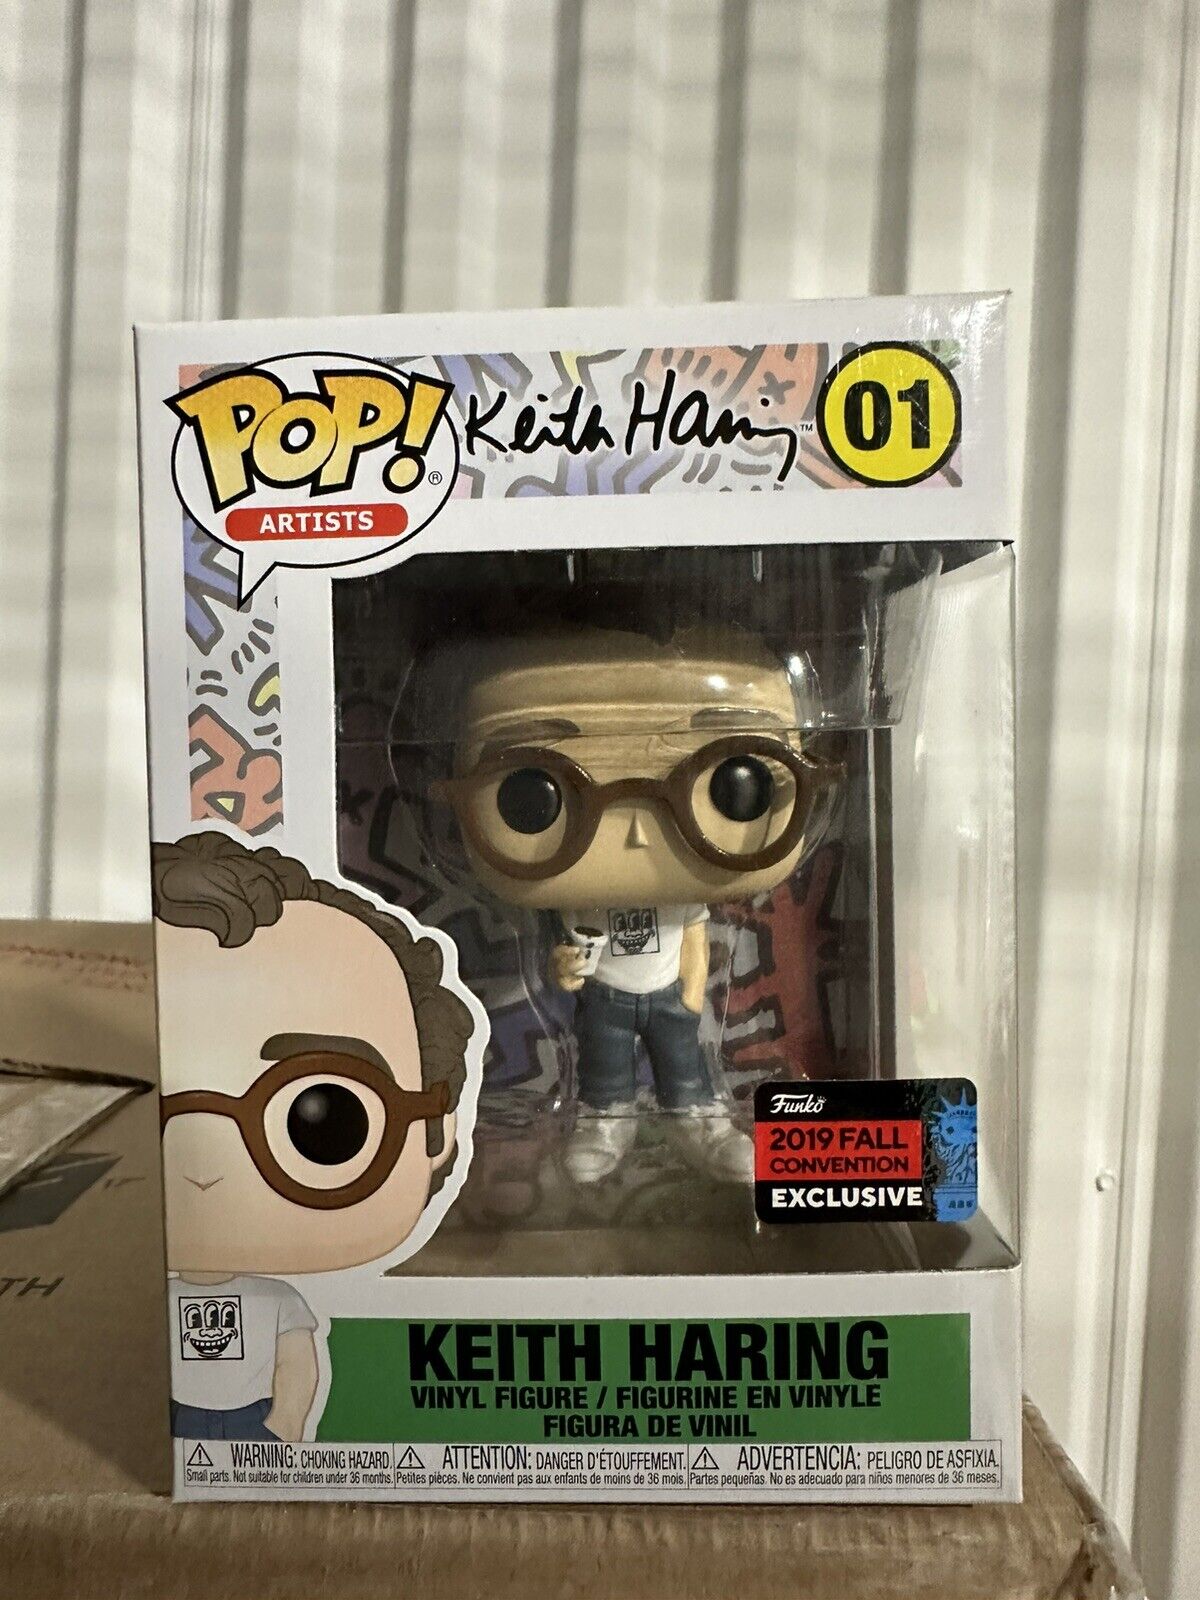 G2 Funko Pop Artists Keith Haring 2019 Fall Convention Exclusive Vinyl Figure 01